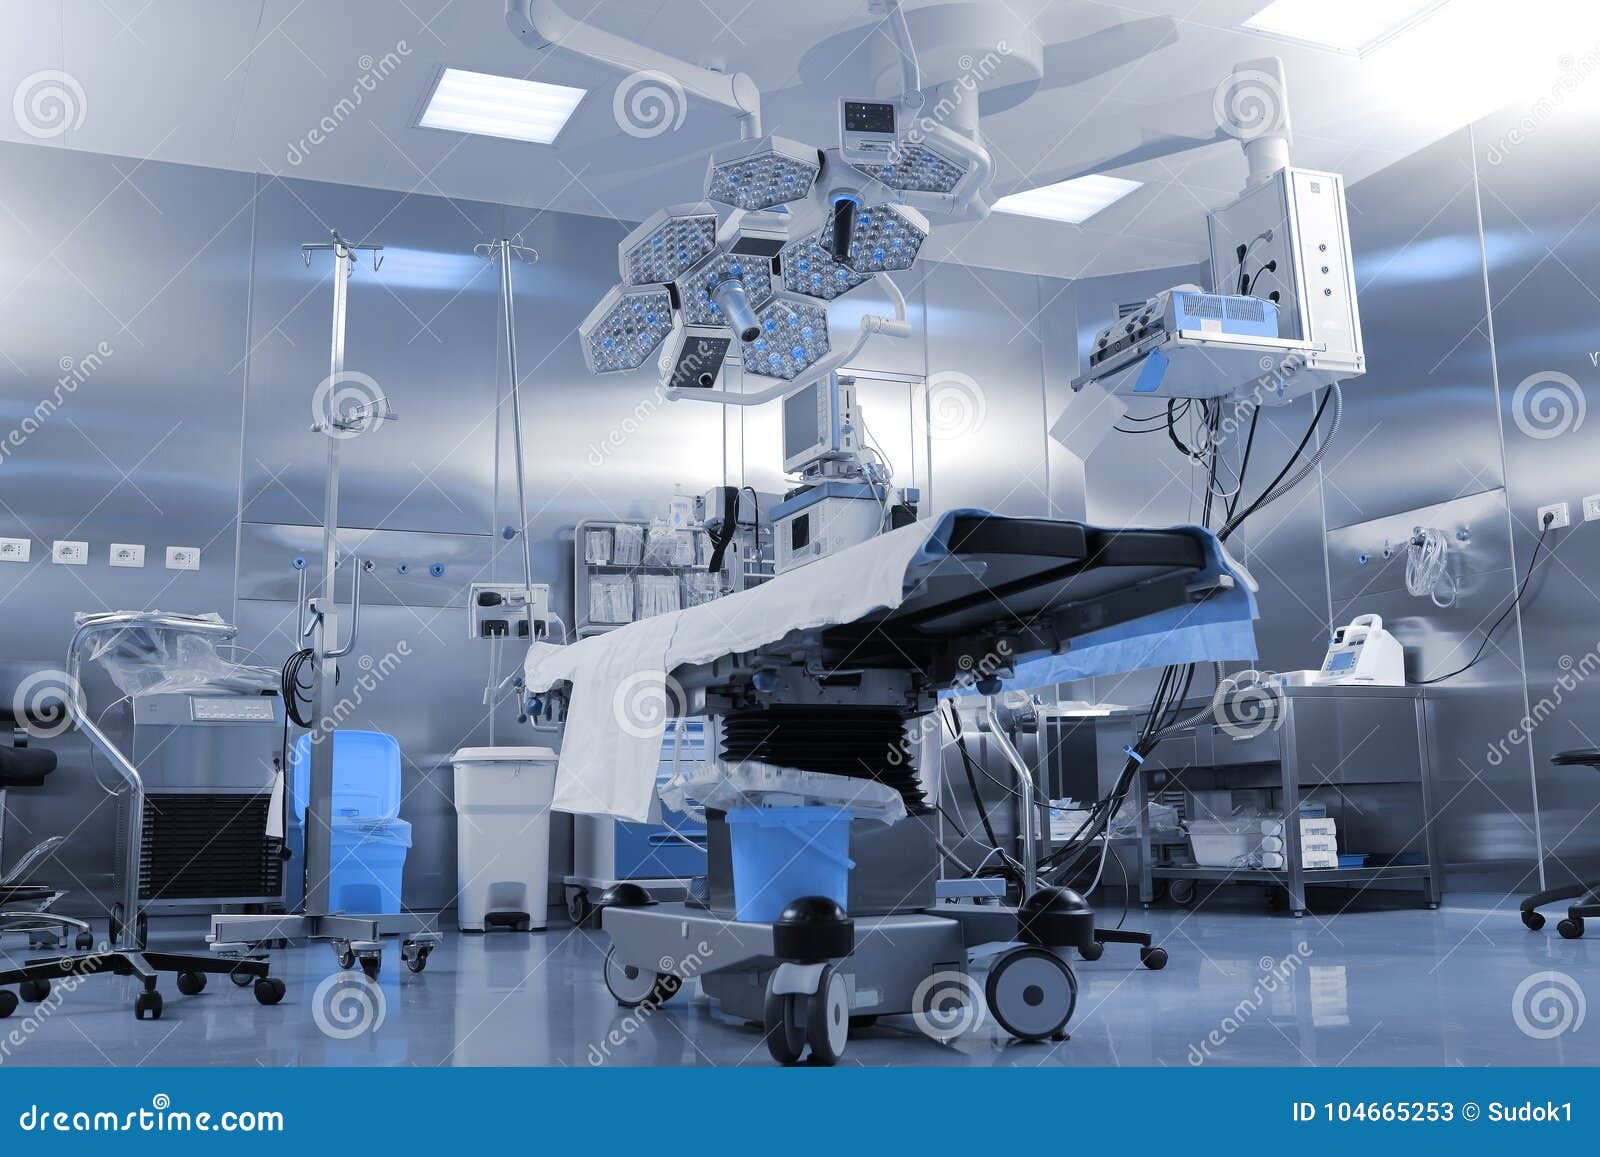 general view of the modern surgical room